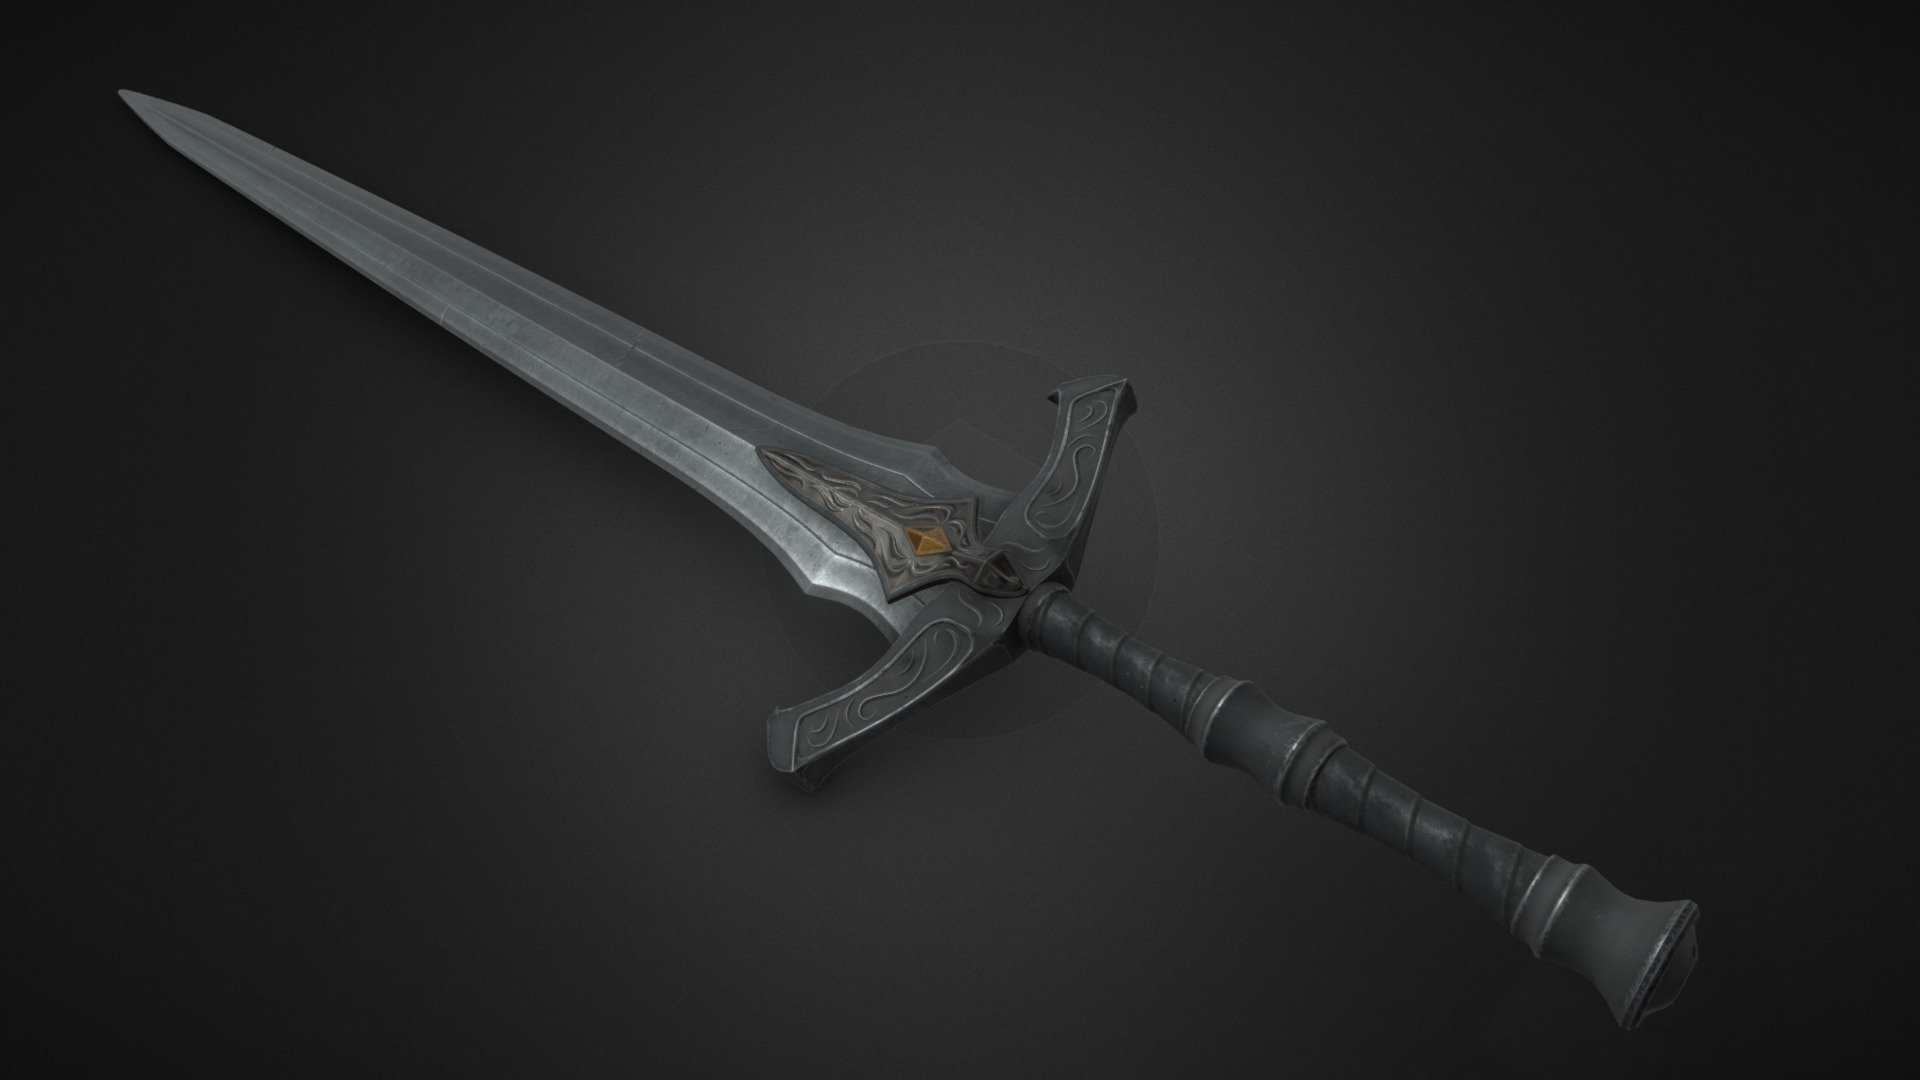 Low poly game ready model. Total polycount 4300 tris.

PBR Metallic - Roughness 4k textures.

Model created on Blender. Textured with Substance Painter 3d model